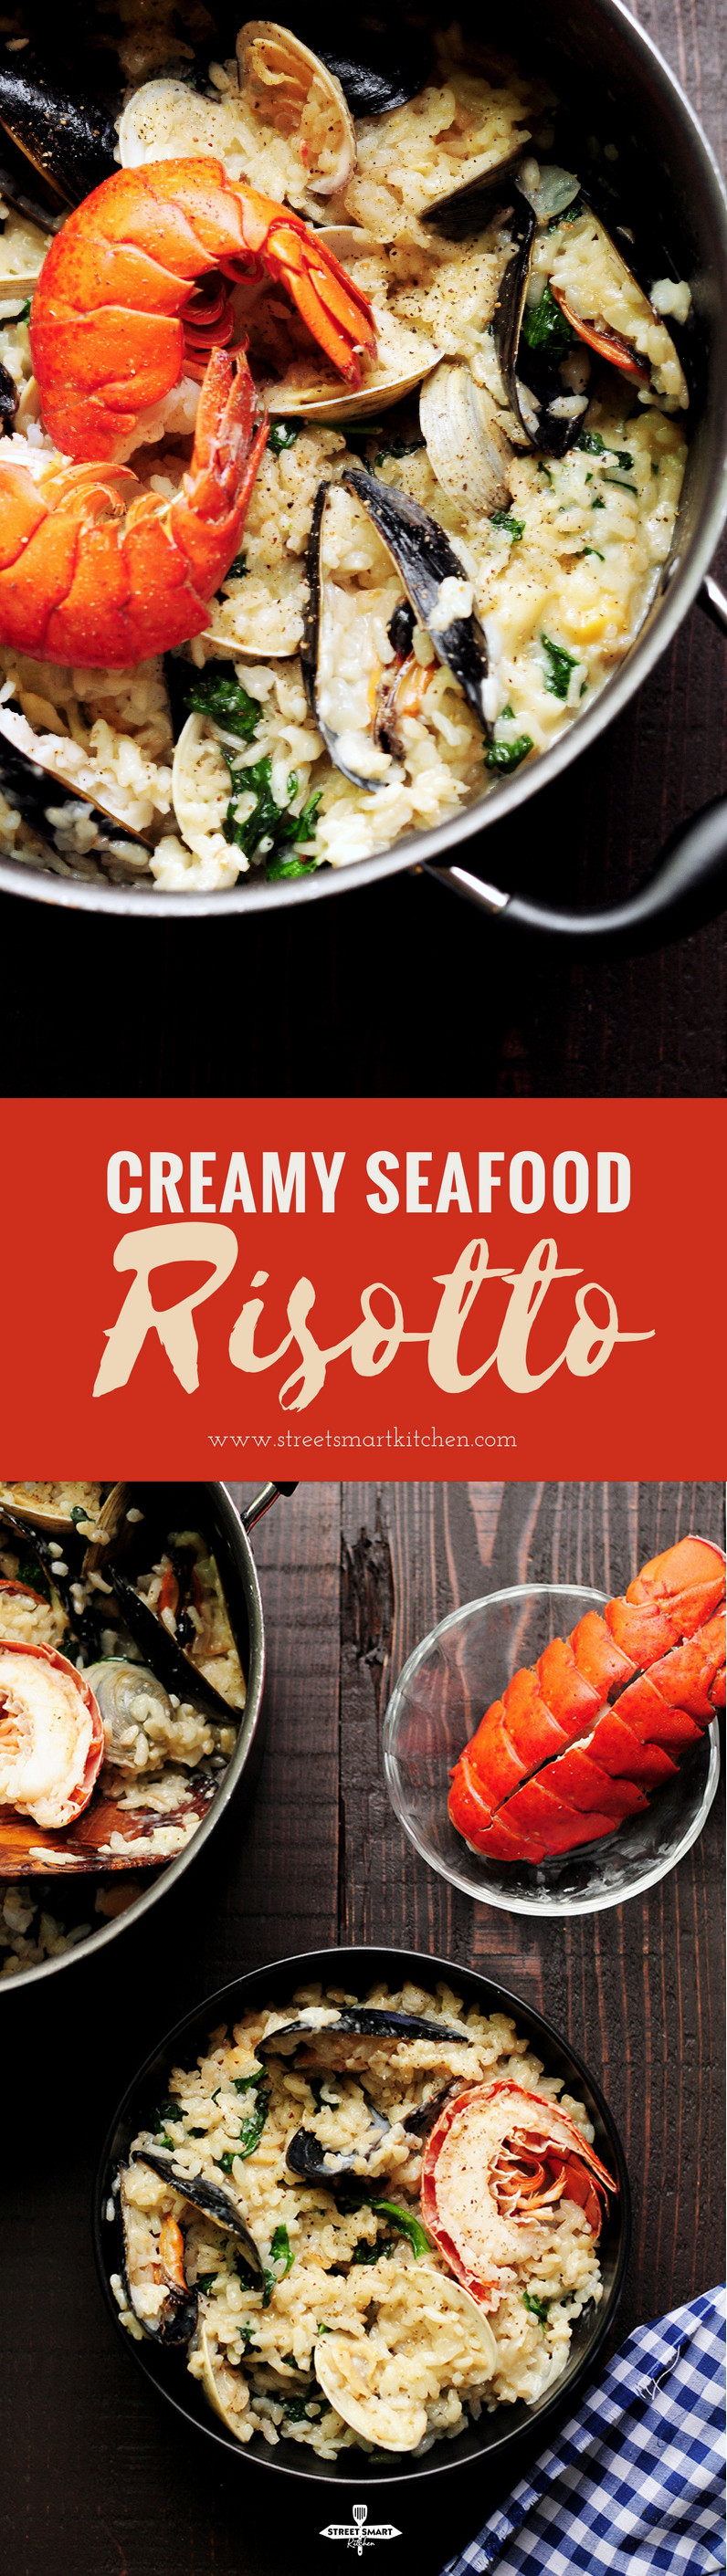 Creamy seafood risotto recipe dedicatedly simmered in lobster stock and heavy cream with clams, mussels, bay scallops, lobster tails, and spinach. It's a perfect date-night-in dinner or for any special occasions.